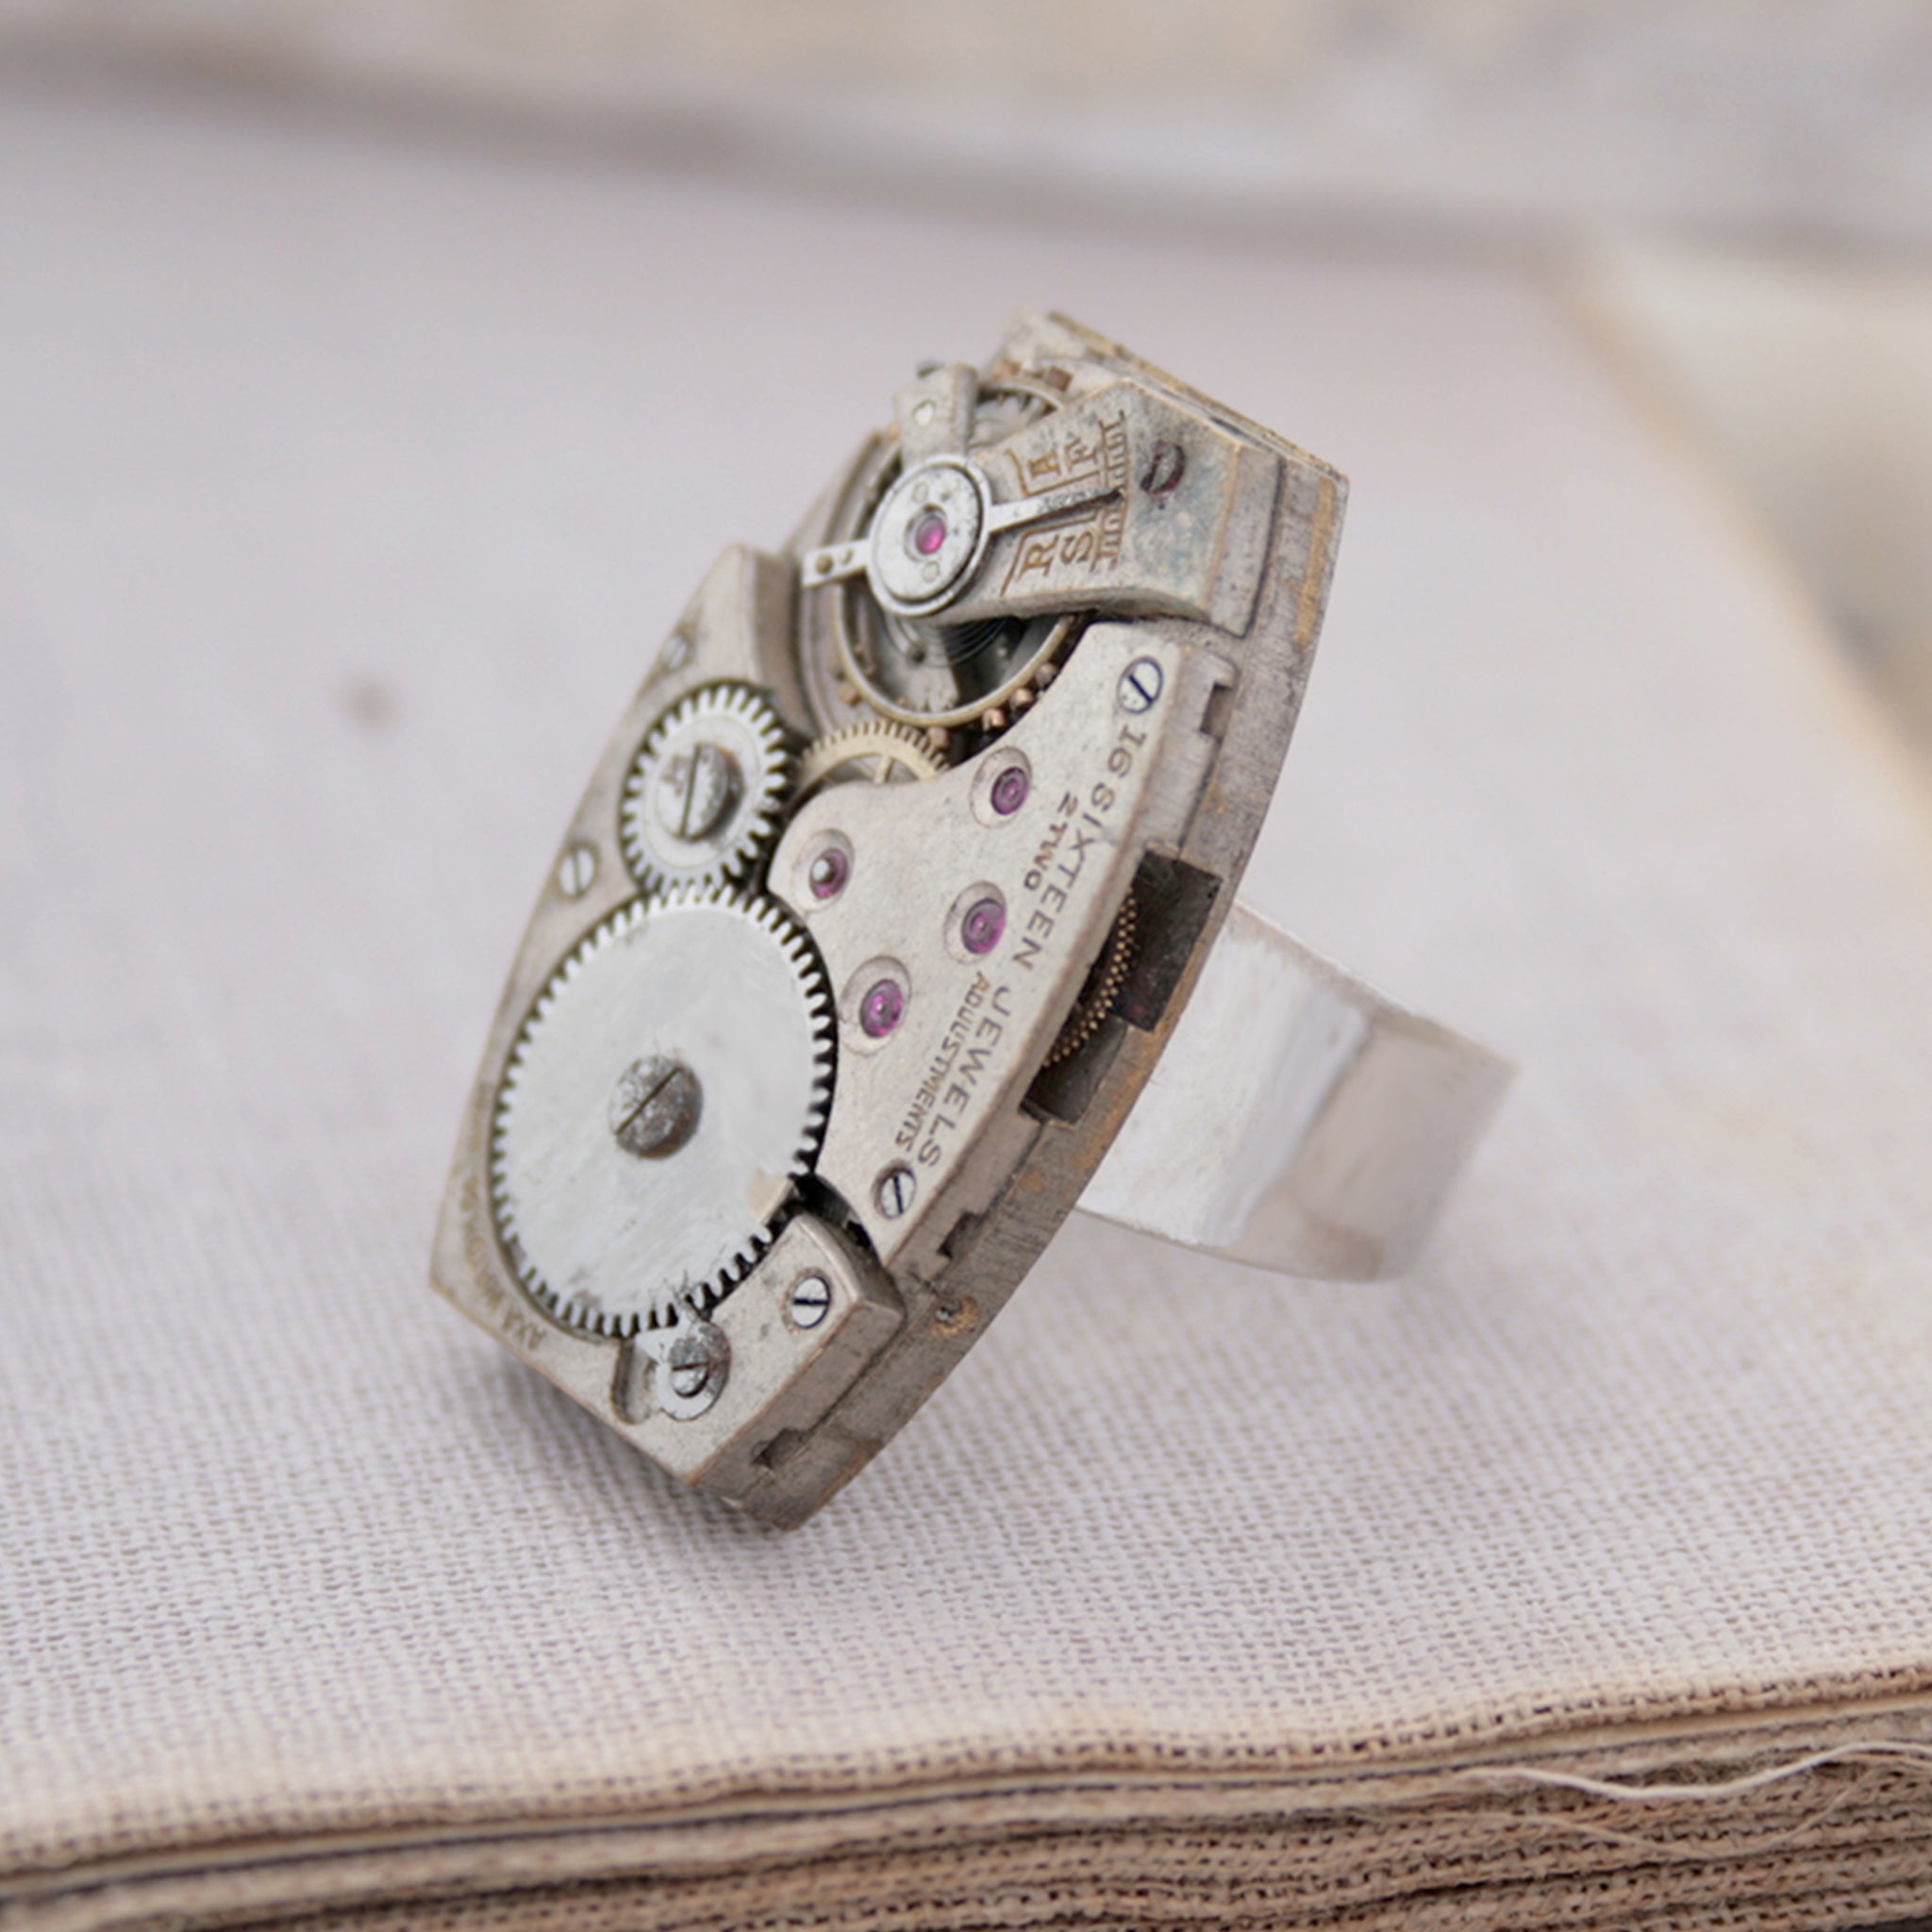 Steampunk Cocktail Ring made of vintage watch movement